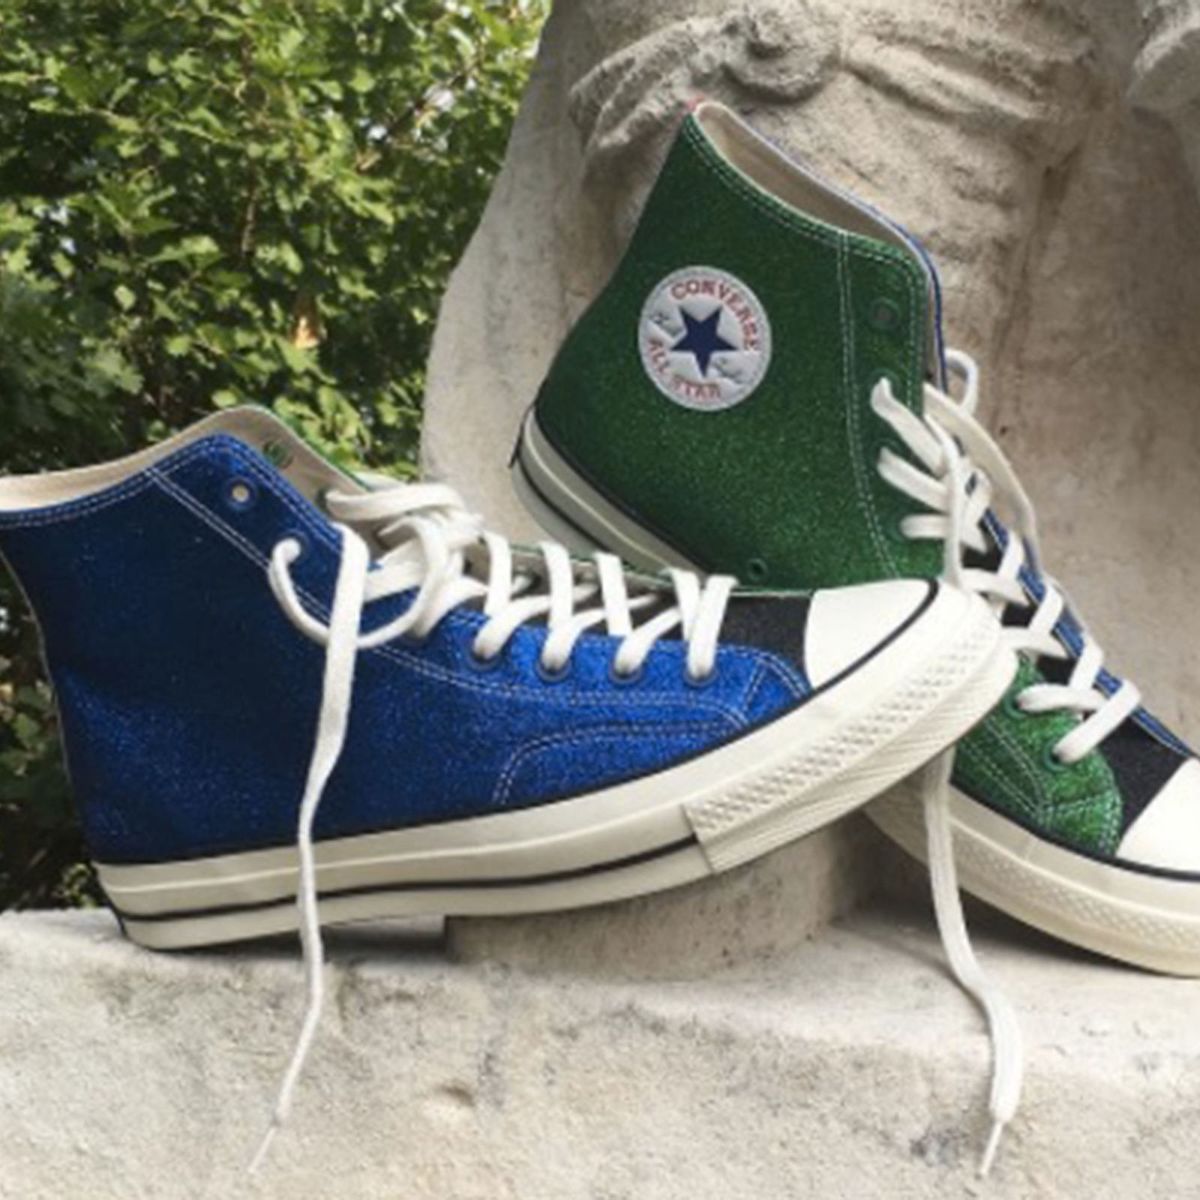 fordøje Inca Empire Sprog The Converse x JW Anderson collection goes on sale just in time for  Christmas